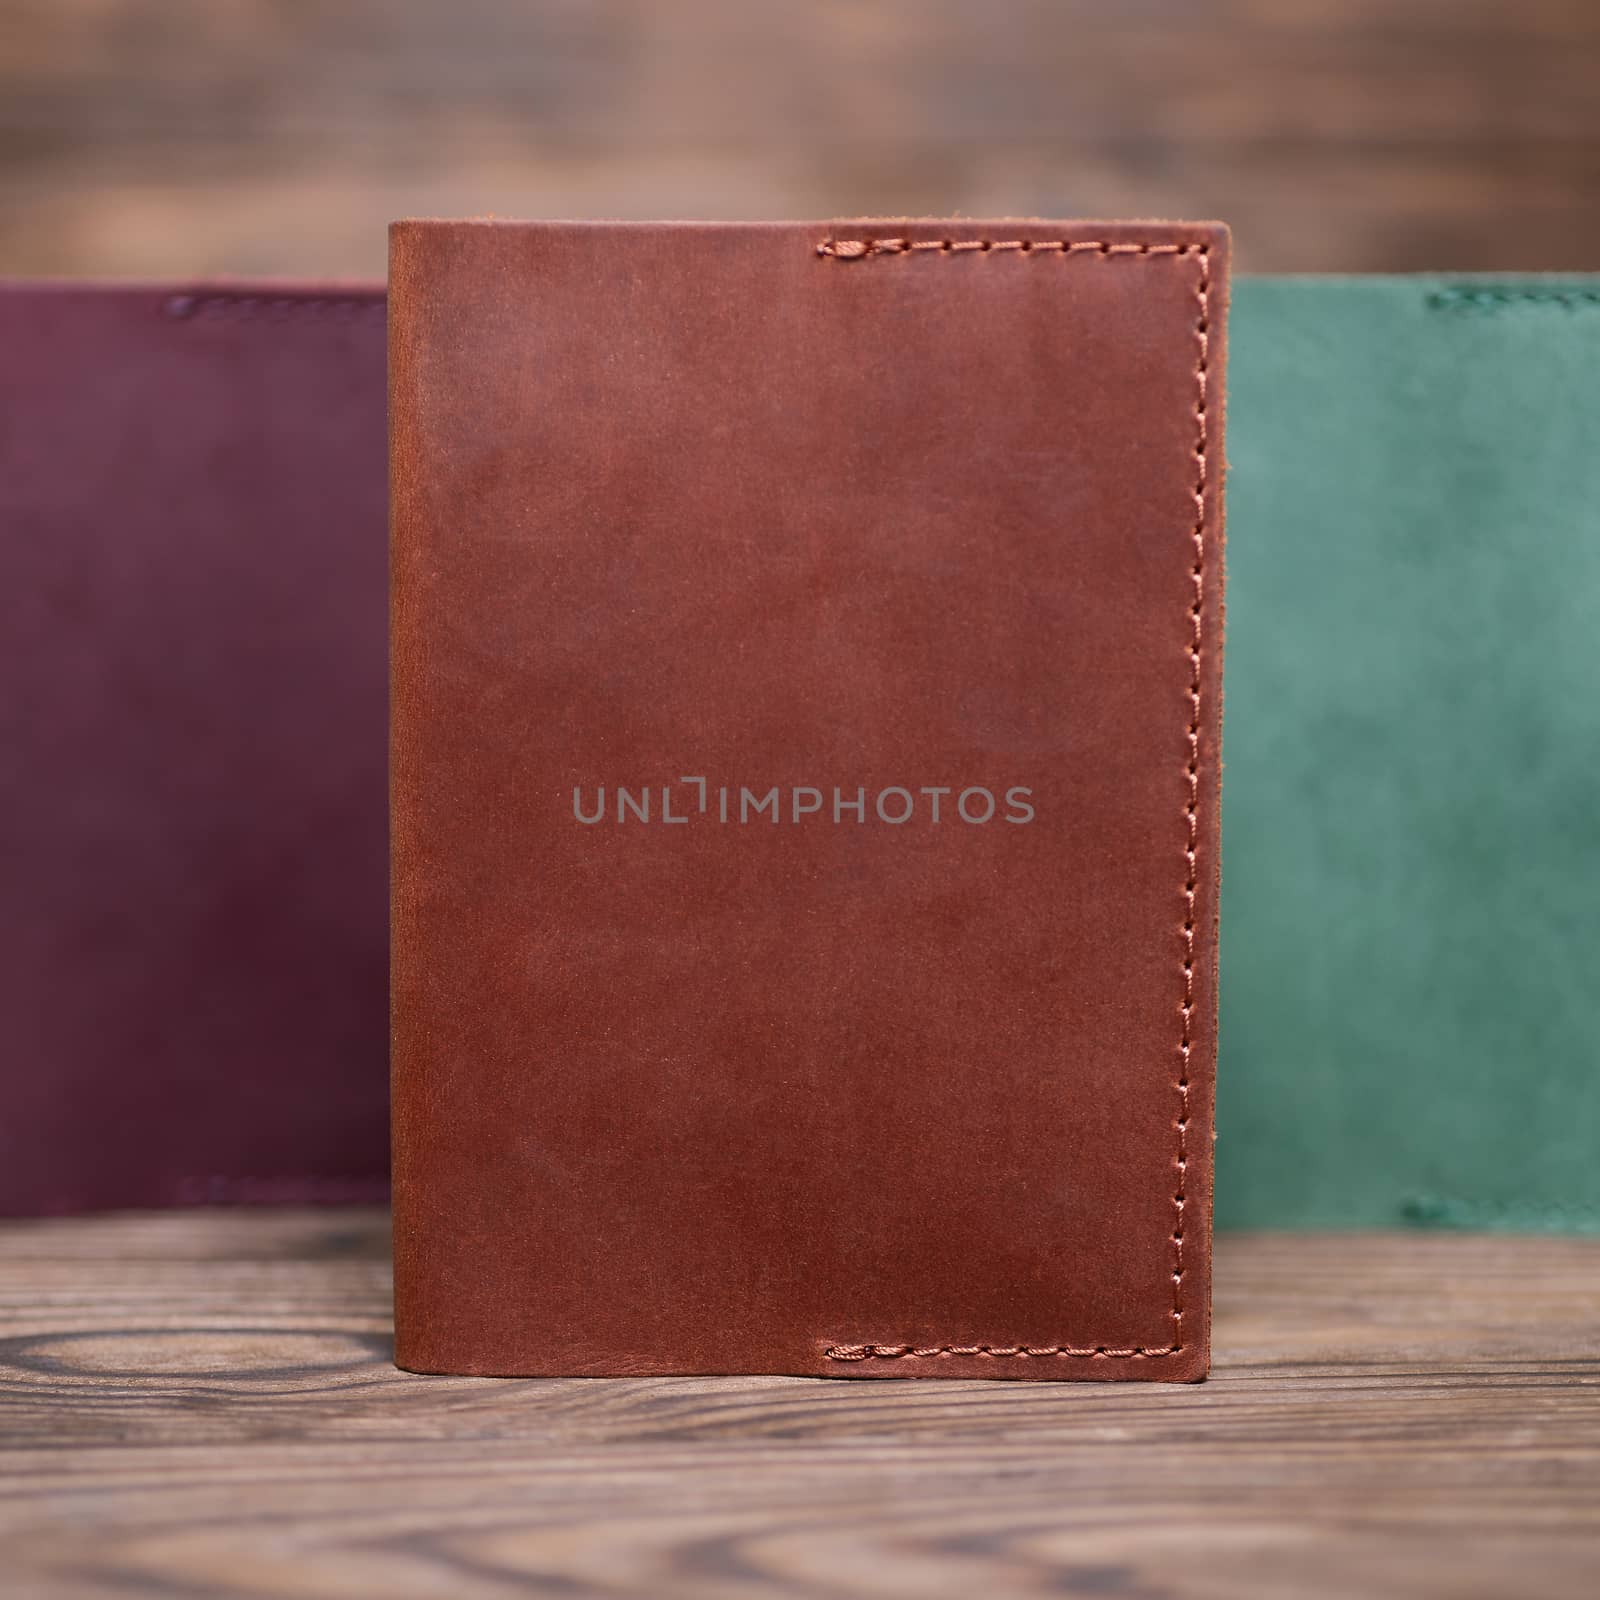 Ginger color handmade leather passport cover on blurred wooden background. Businessman`s accessory.